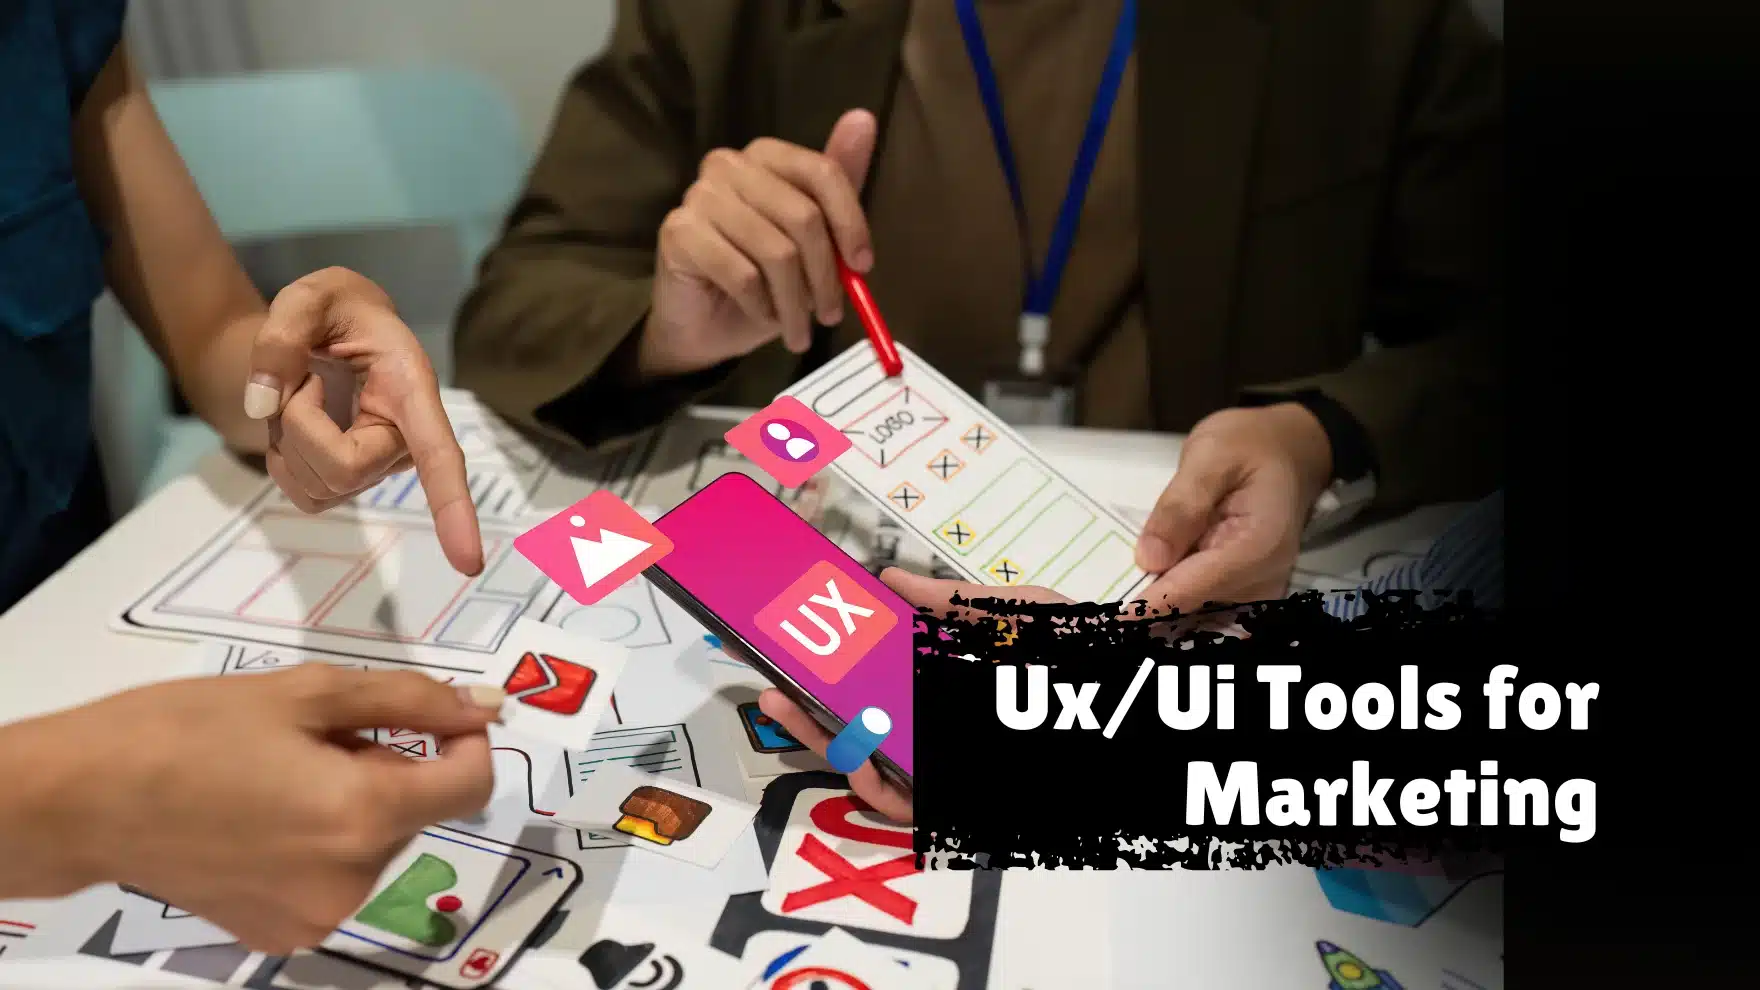 Ux/Ui Tools for Marketing